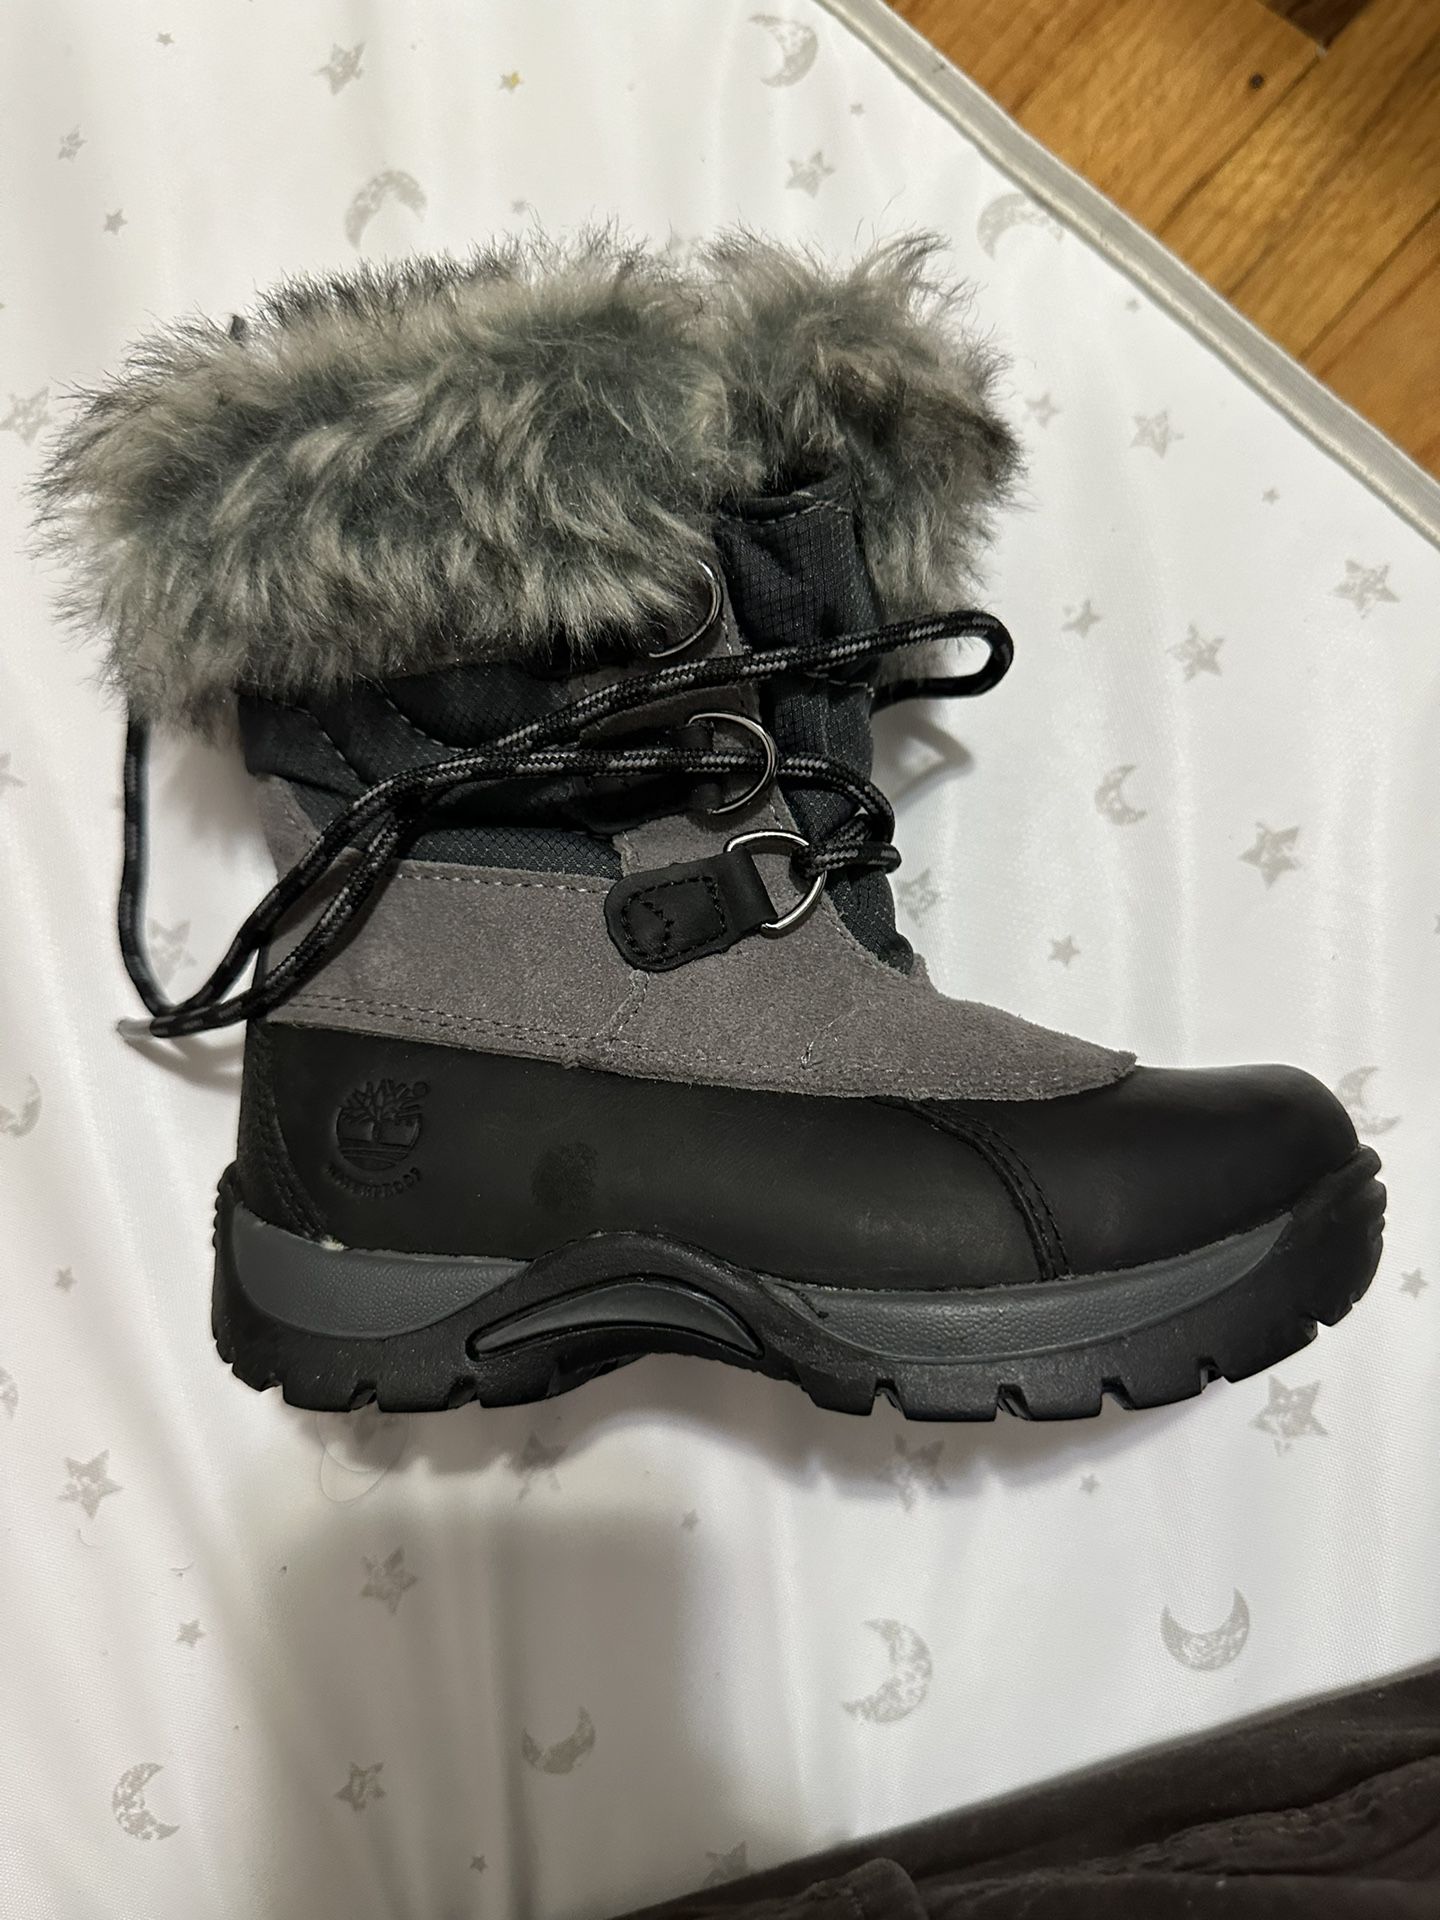 Timberland Toddler Boots Size 9